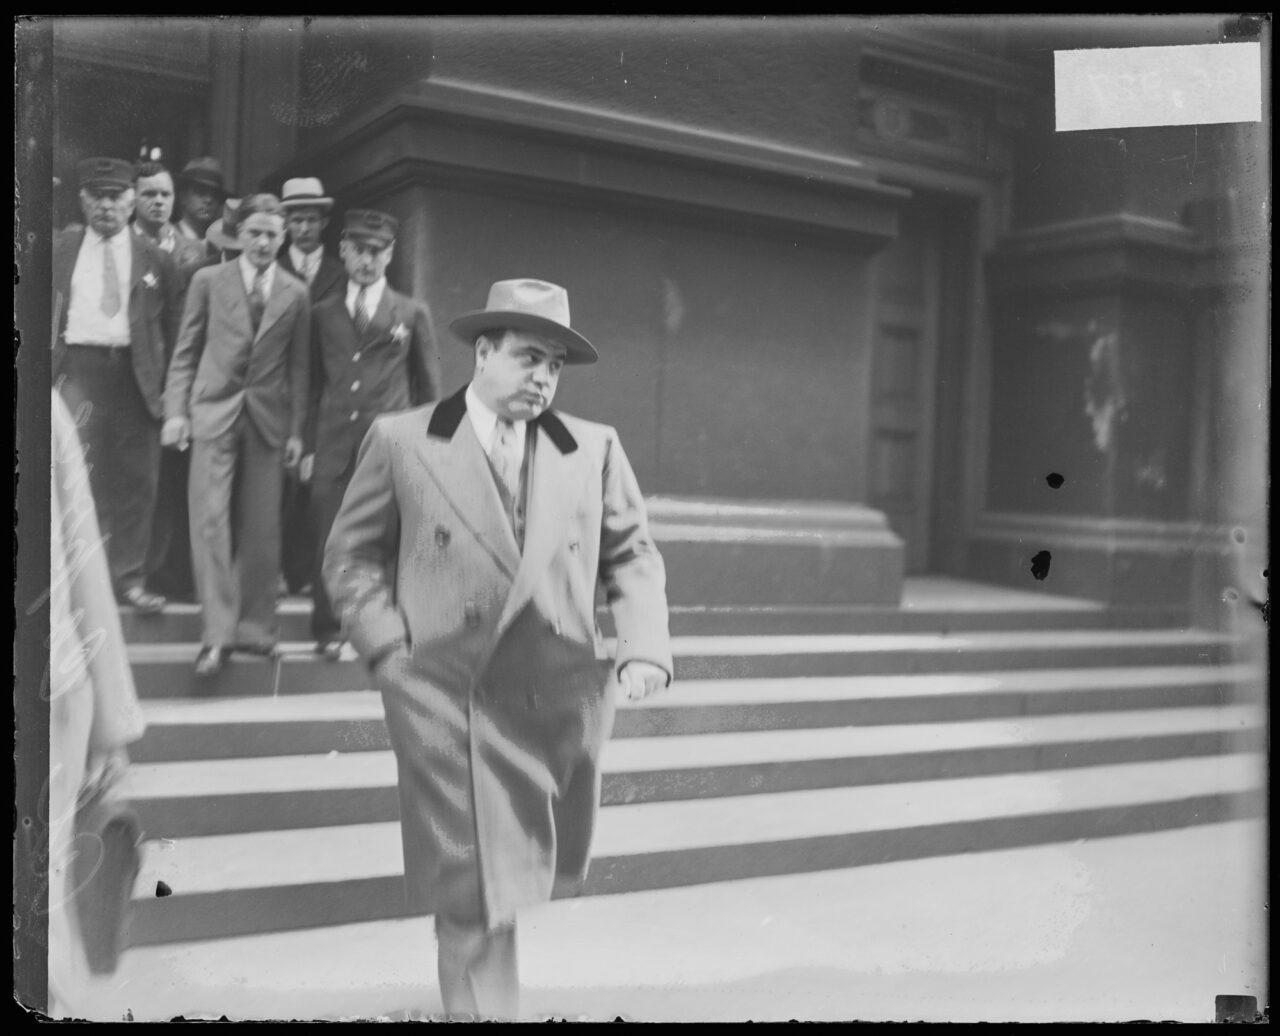 Al Capone leaving court during trial for tax evasion.